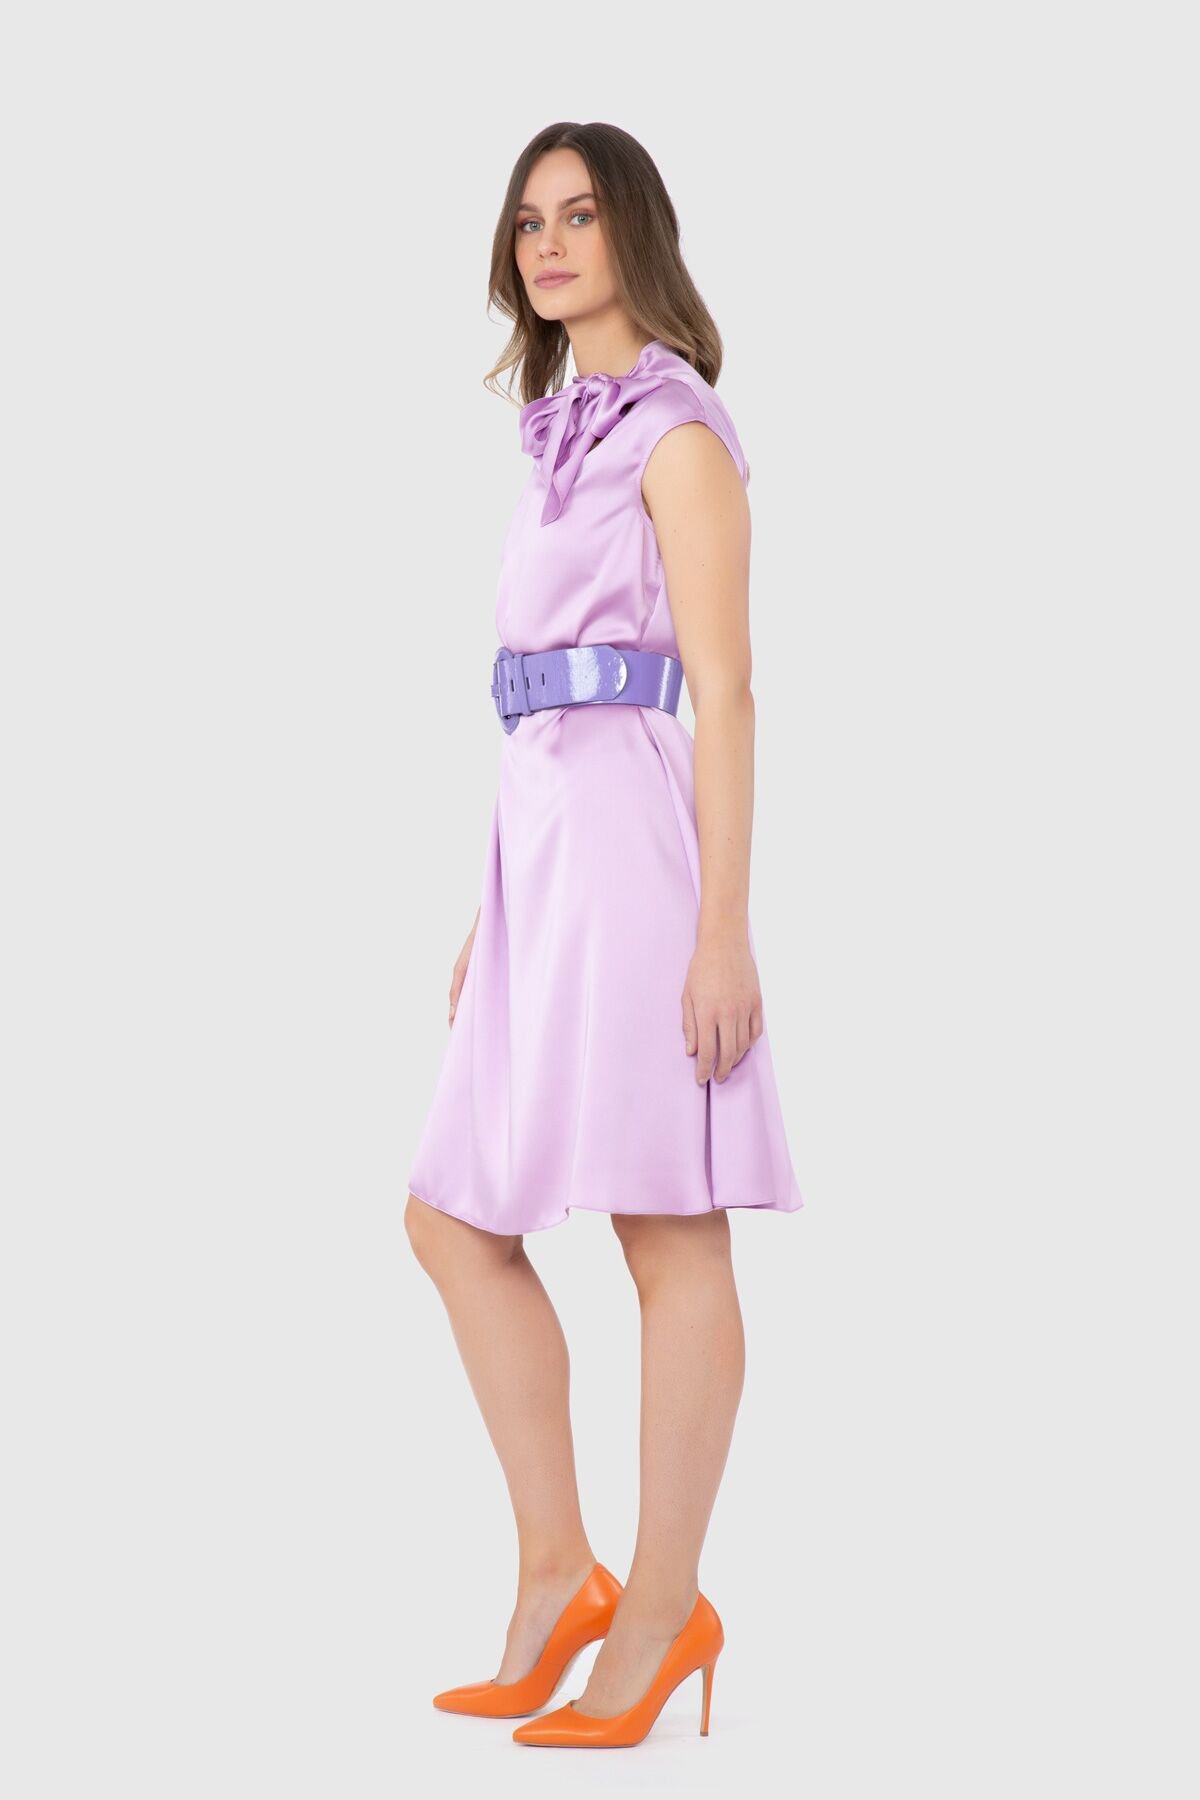 Belted Collar Detailed Purple Dress